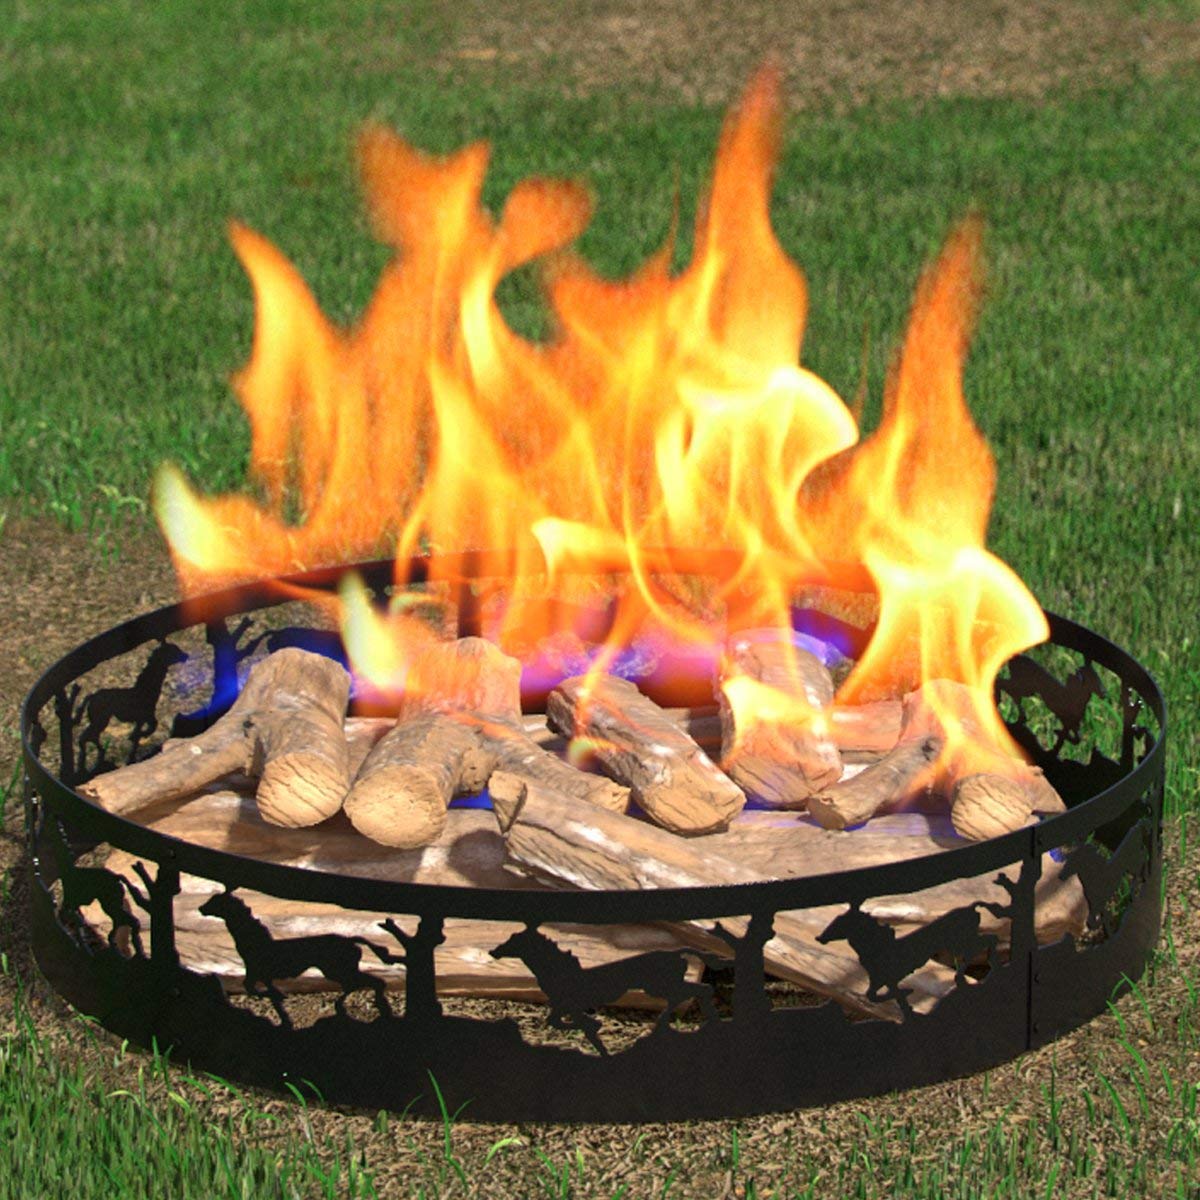 Regal Flame Boston Backyard Garden Home Deer and Trees Light Wood Fire Pit Fire Ring. For RV, Camping, and Outdoor Fireplace. Wo